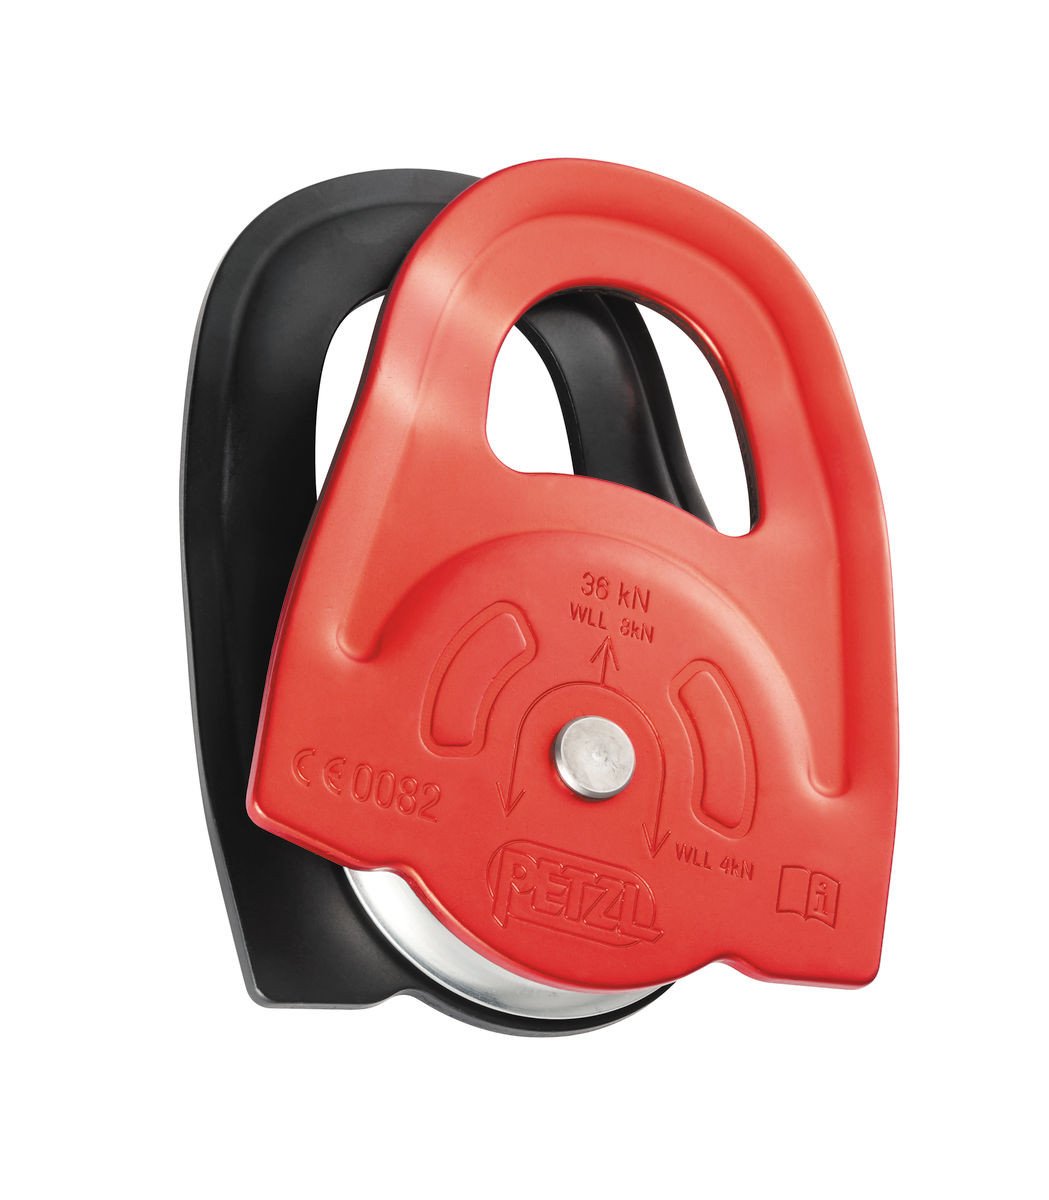 High strength, high-efficiency Prusik pulley by Petzl High-strength pulley designed for rescue professionals to set up progress capture. Product available here.